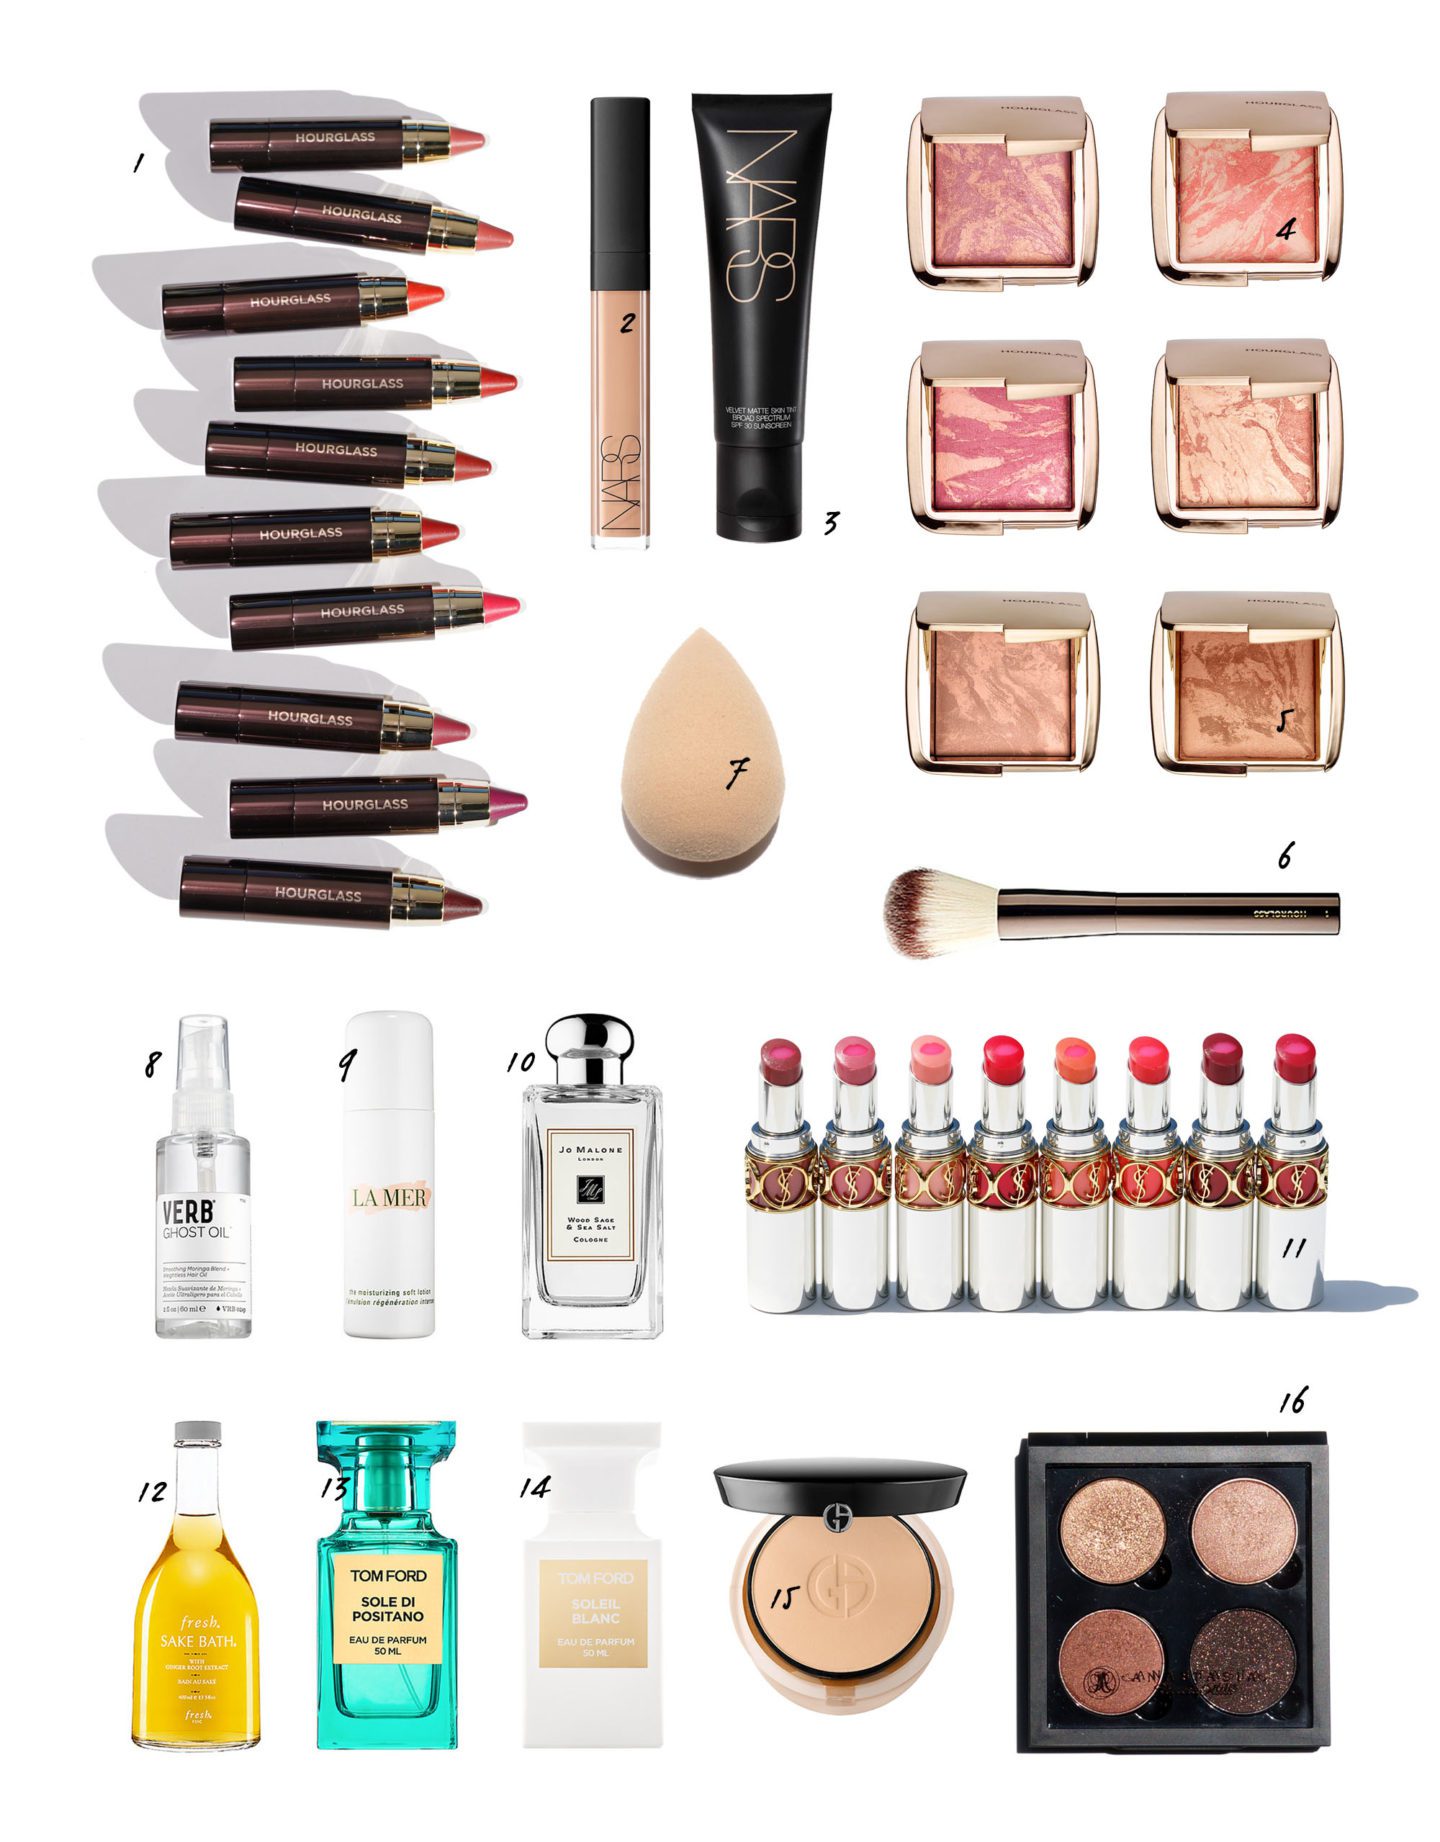 Sephora Beauty Insider Sale Recommendations | The Beauty Look Book